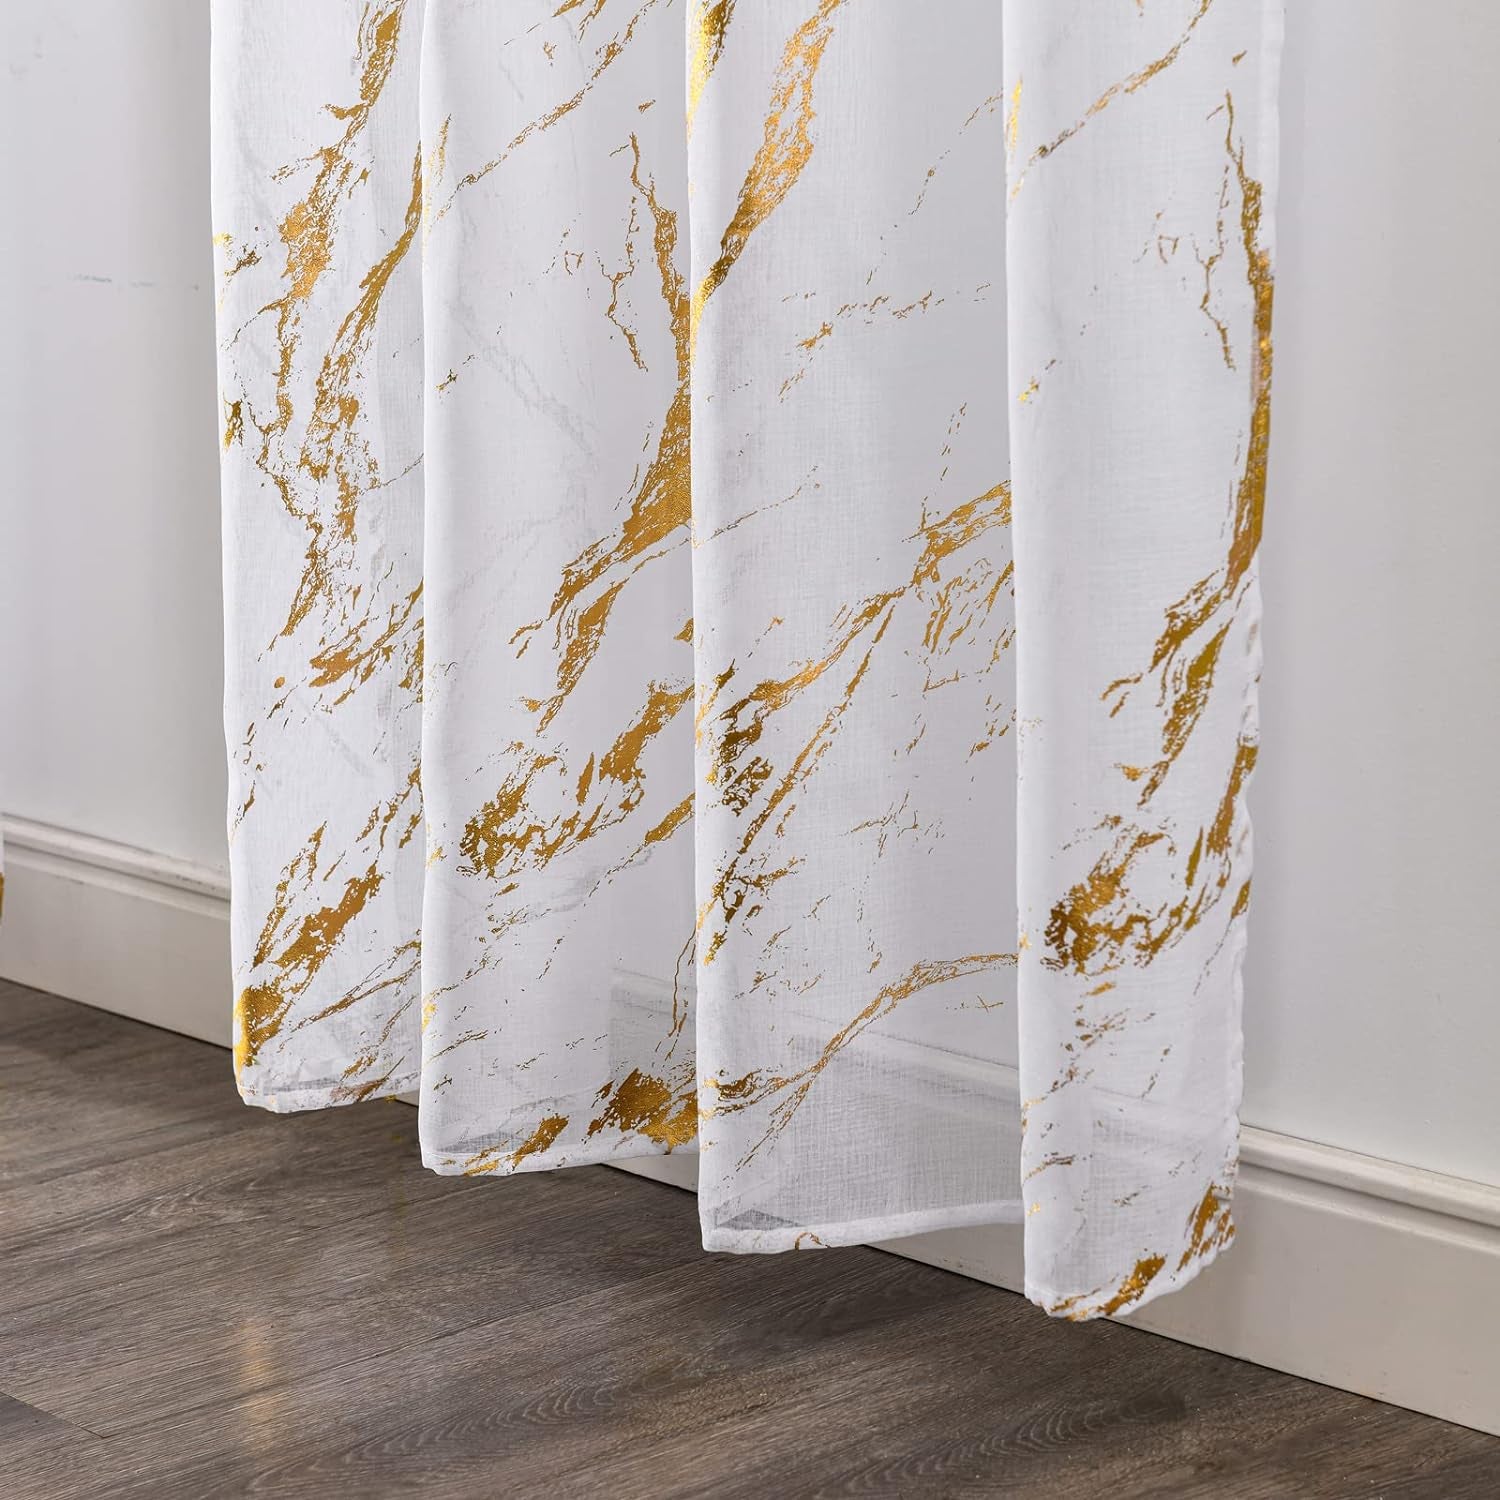 Sutuo Home Marble White Sheer Curtains 84 Inch Length, Gold Foil Print Metallic Bronzing, Privacy Window Treatment Decor Abstract Drape Pair 2 Panels Set for Bedroom Kitchen Living Room 52" W X 84" L  Sutuo Home   